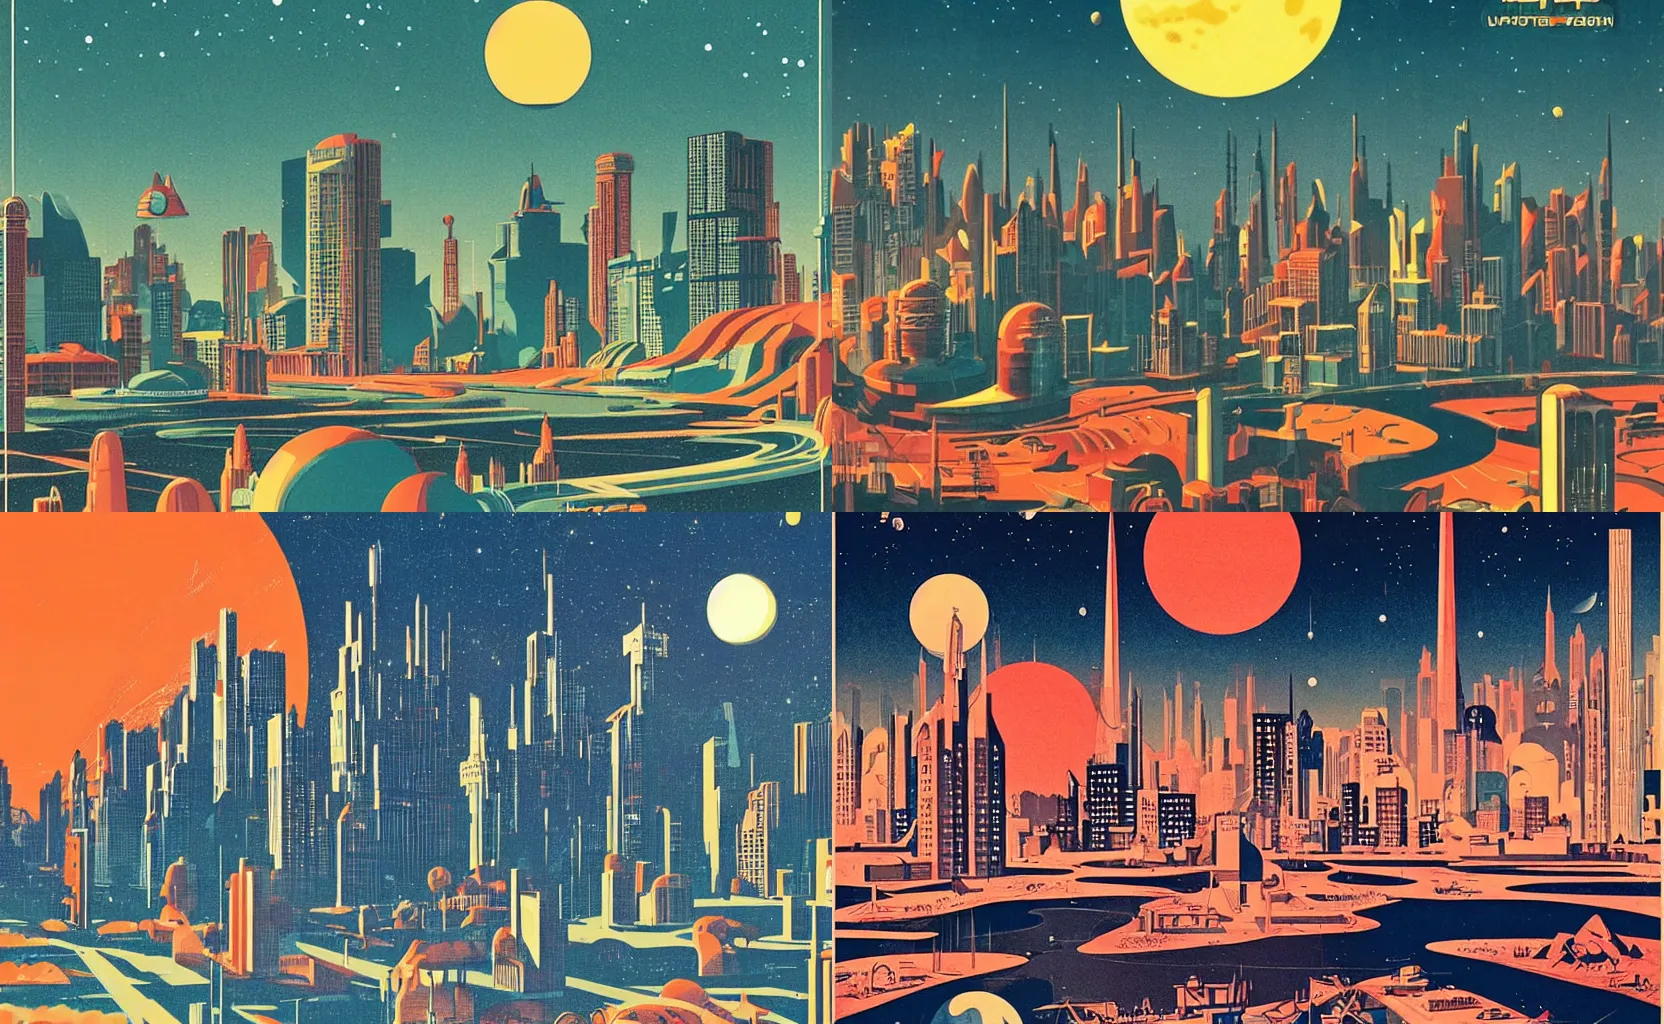 Prompt: a bustling utopian cityscape on the surface of the moon, mid century retro futuristic poster